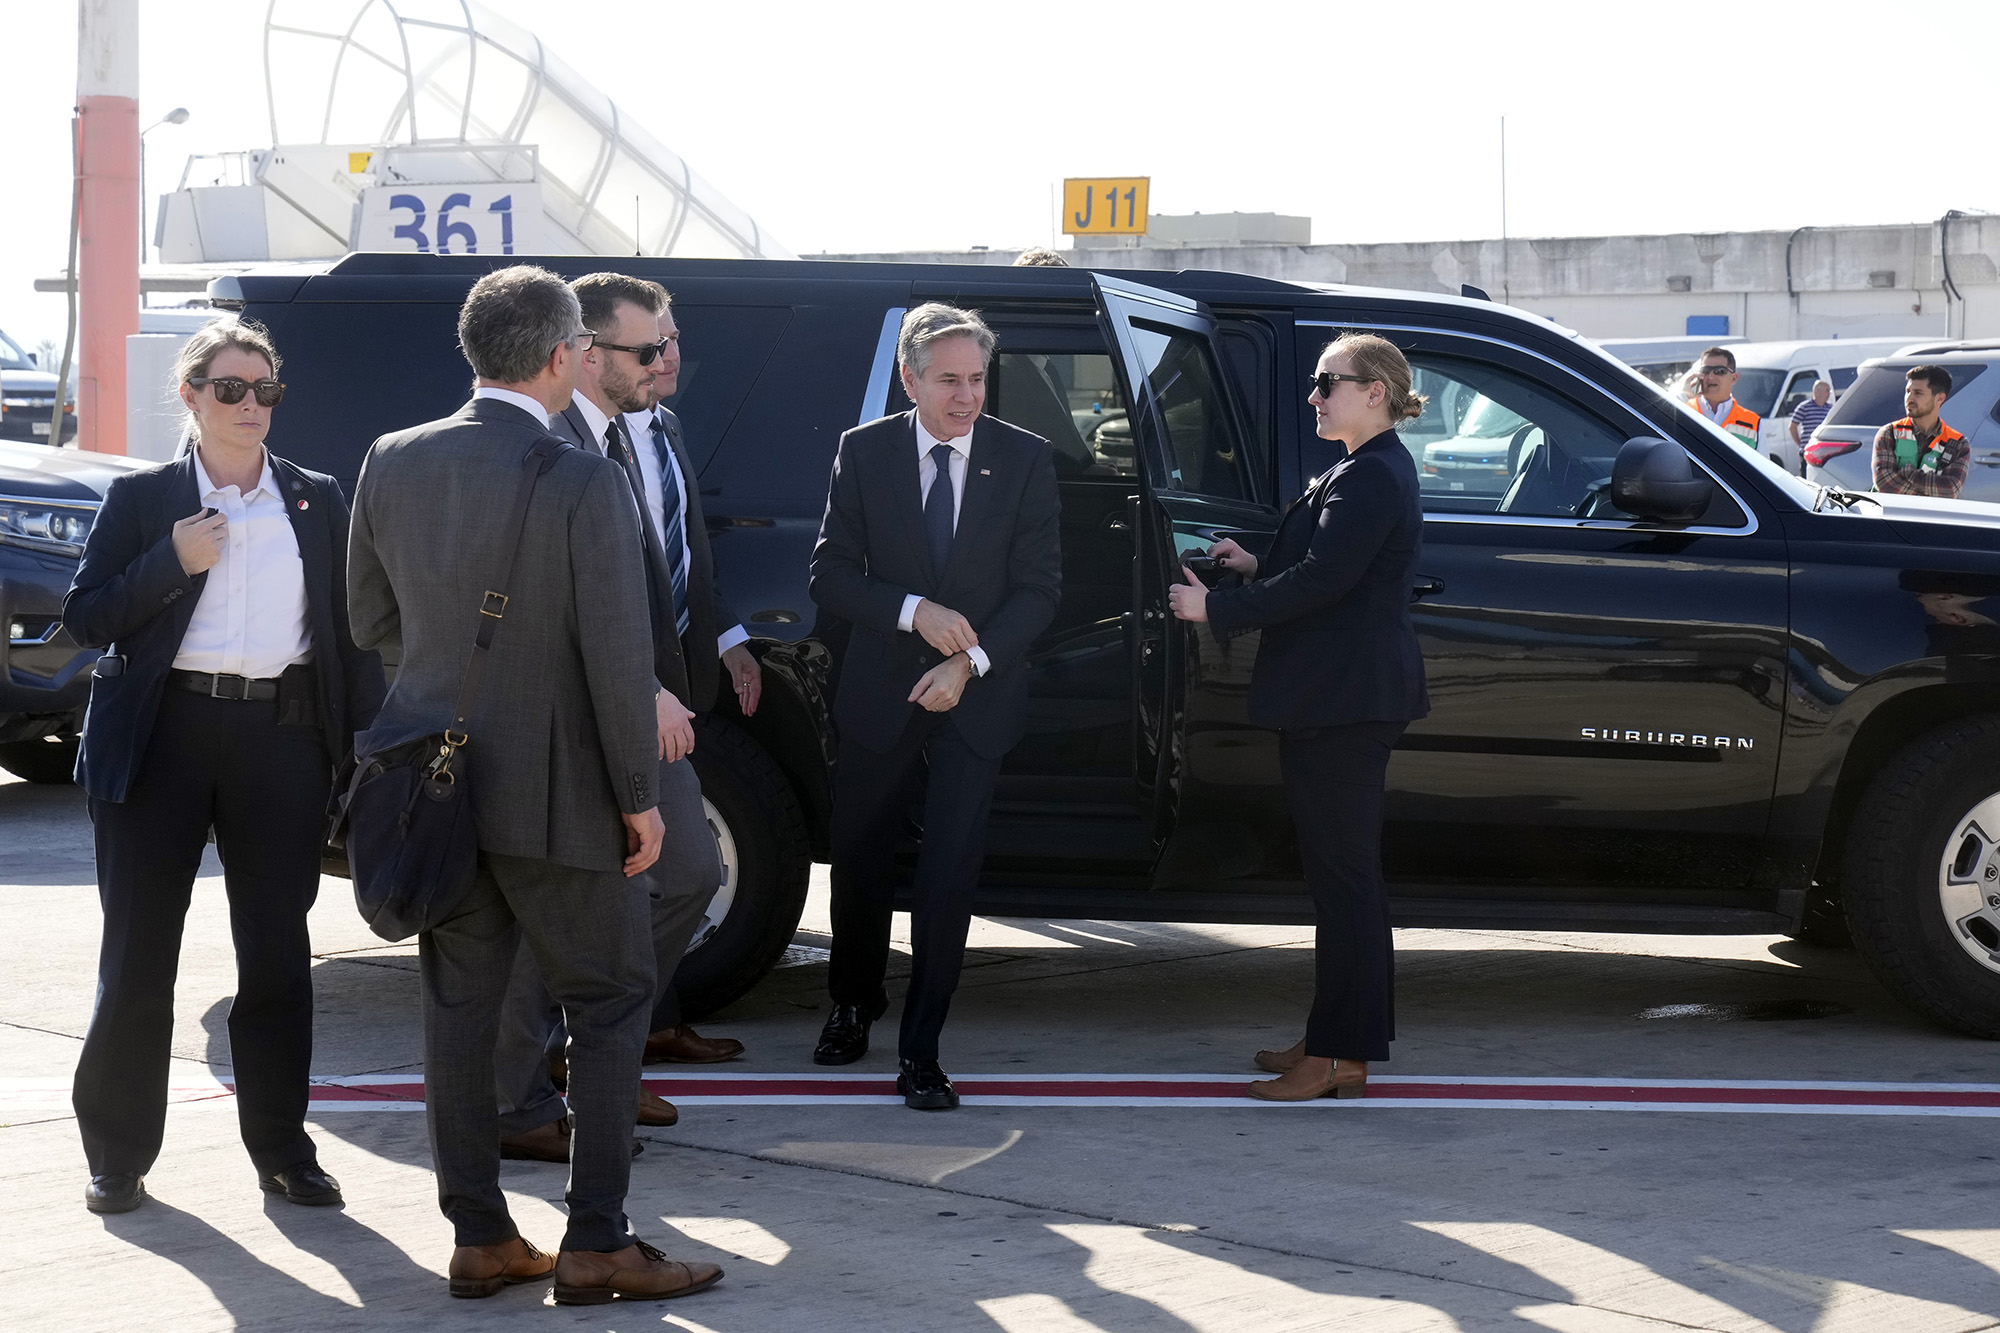 U.S. Secretary of State Antony Blinken gets out of the car as he arrives to board his plane at an airport in Tel Aviv, Israel, on February 8.